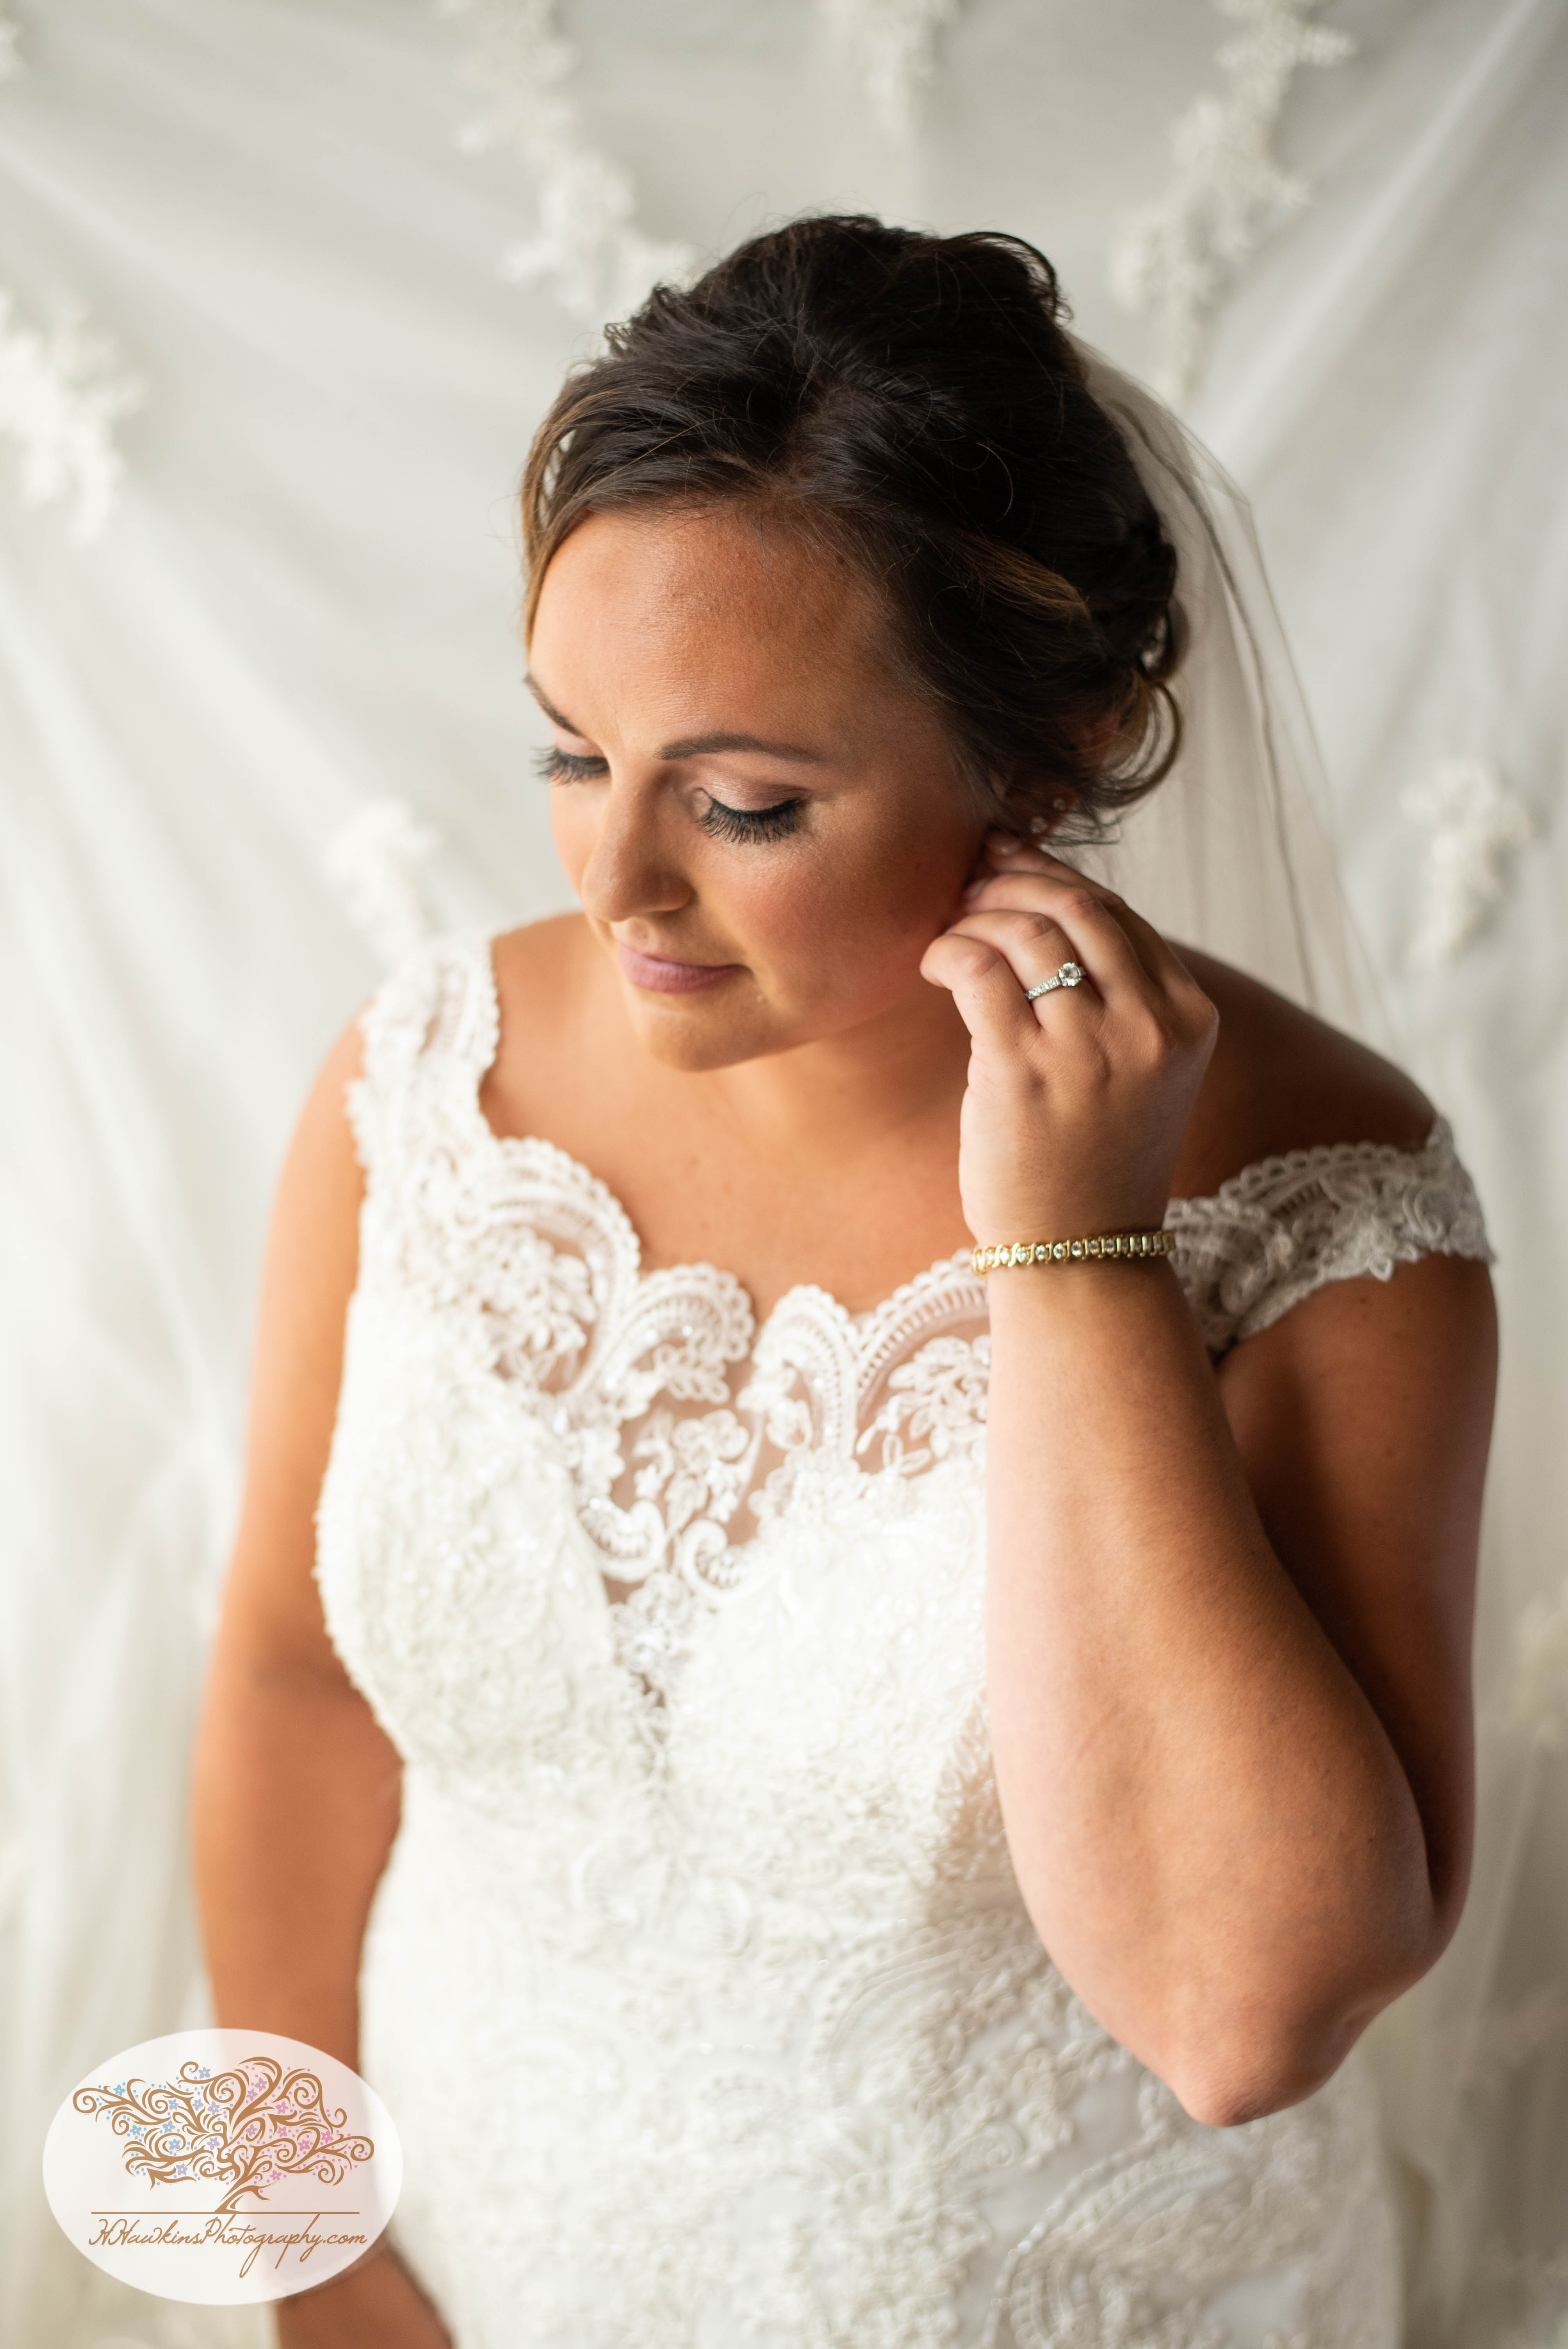 Bride adjust her earring during portrait time with Syracuse wedding photographer